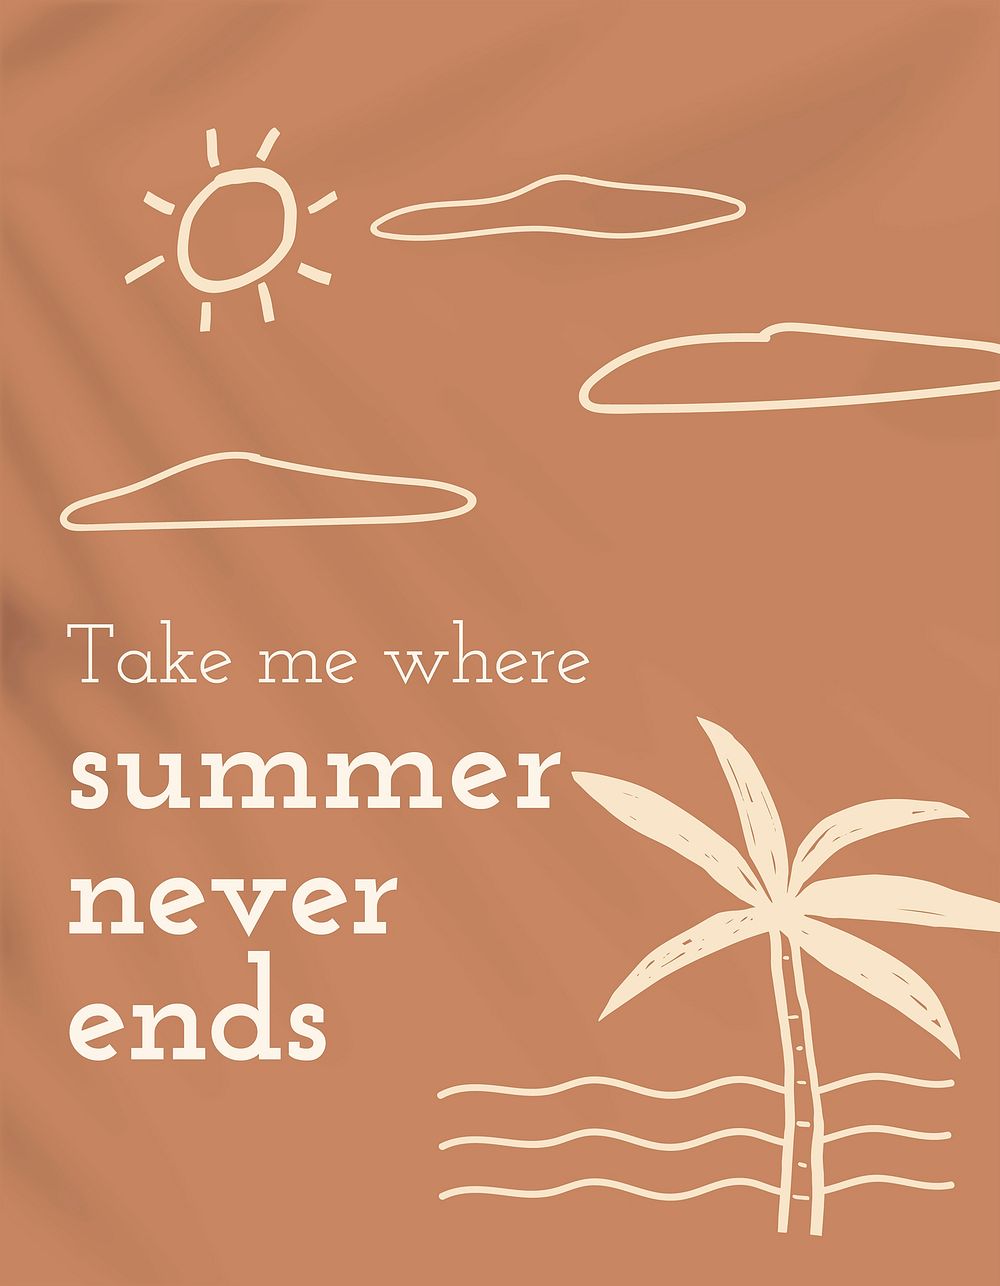 Summer vacation quote with doodle summer never ends cute flyer